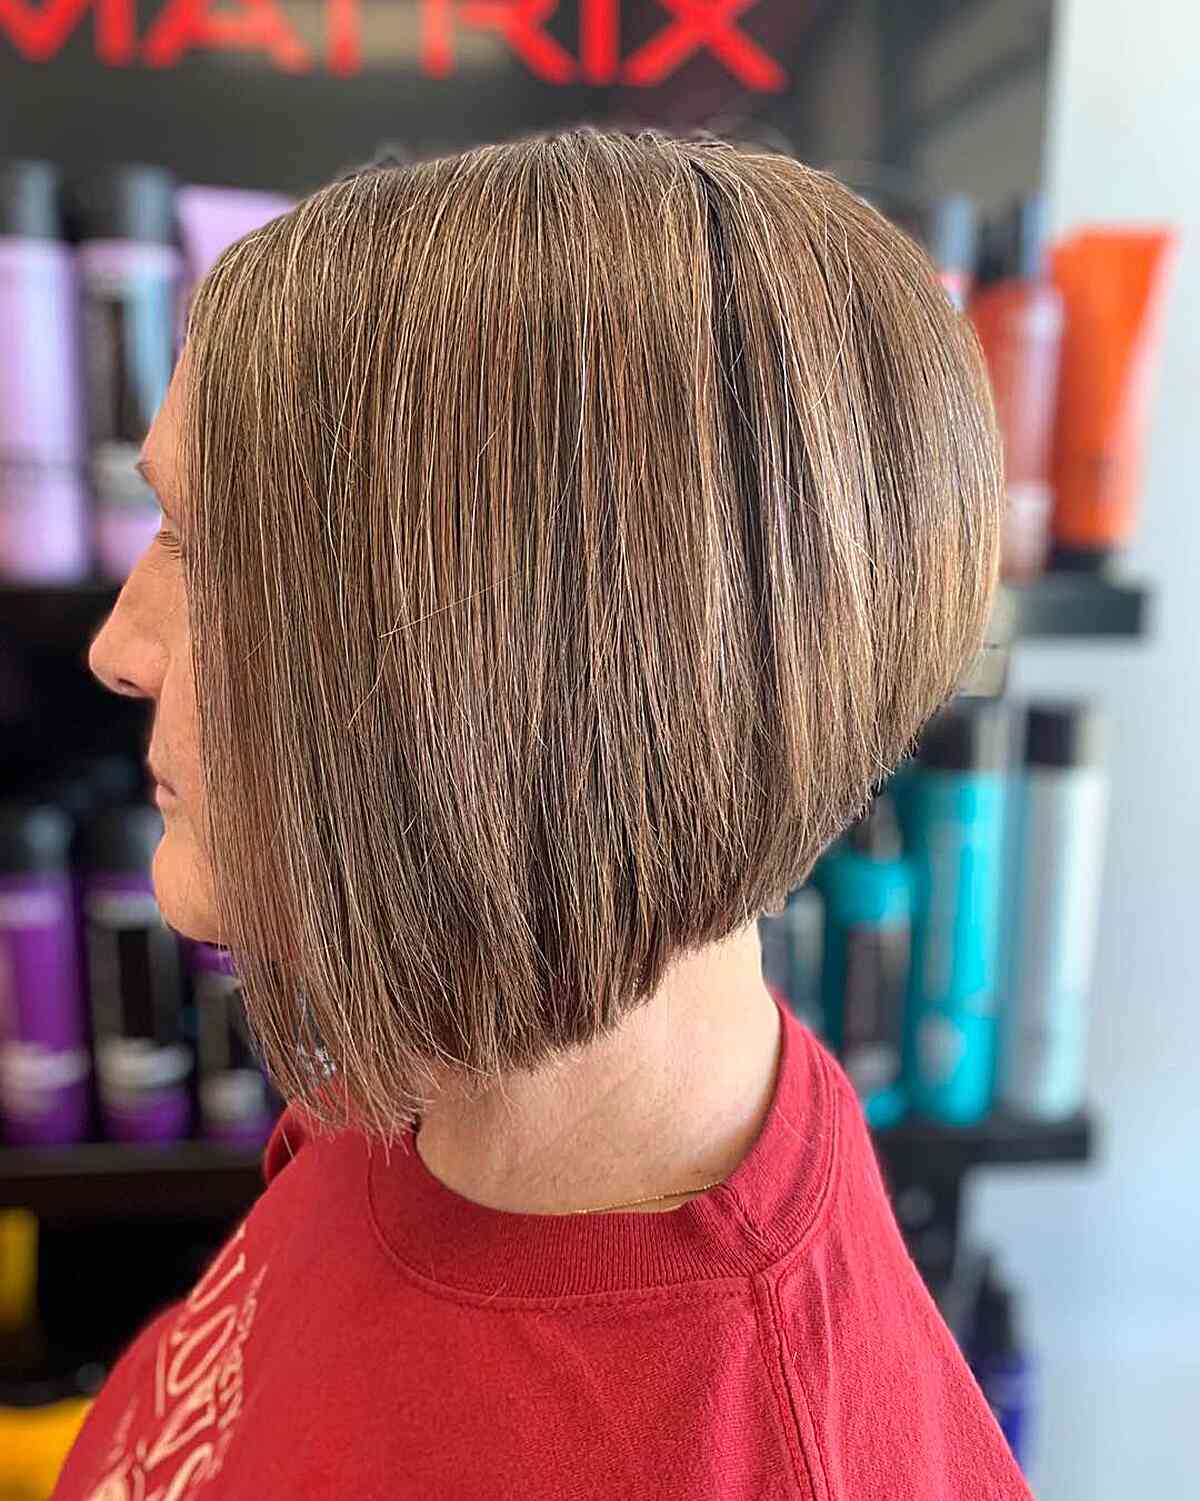 Short High-Stacked Bob Haircut for Mature Ladies Over 50